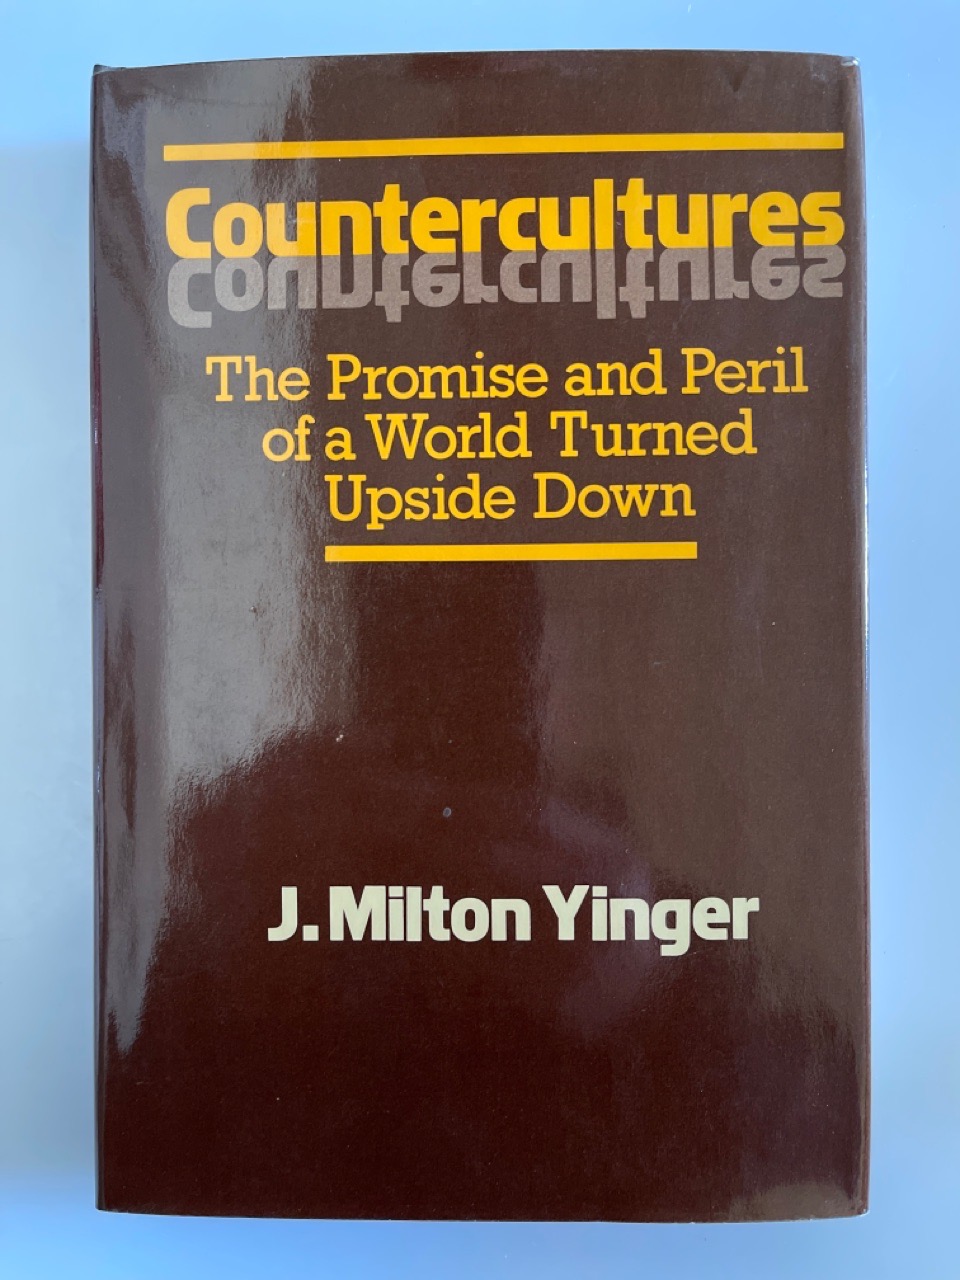 Countercultures: The Promise and the Peril of a World Turned Upside Down. - Yinger, J. Milton